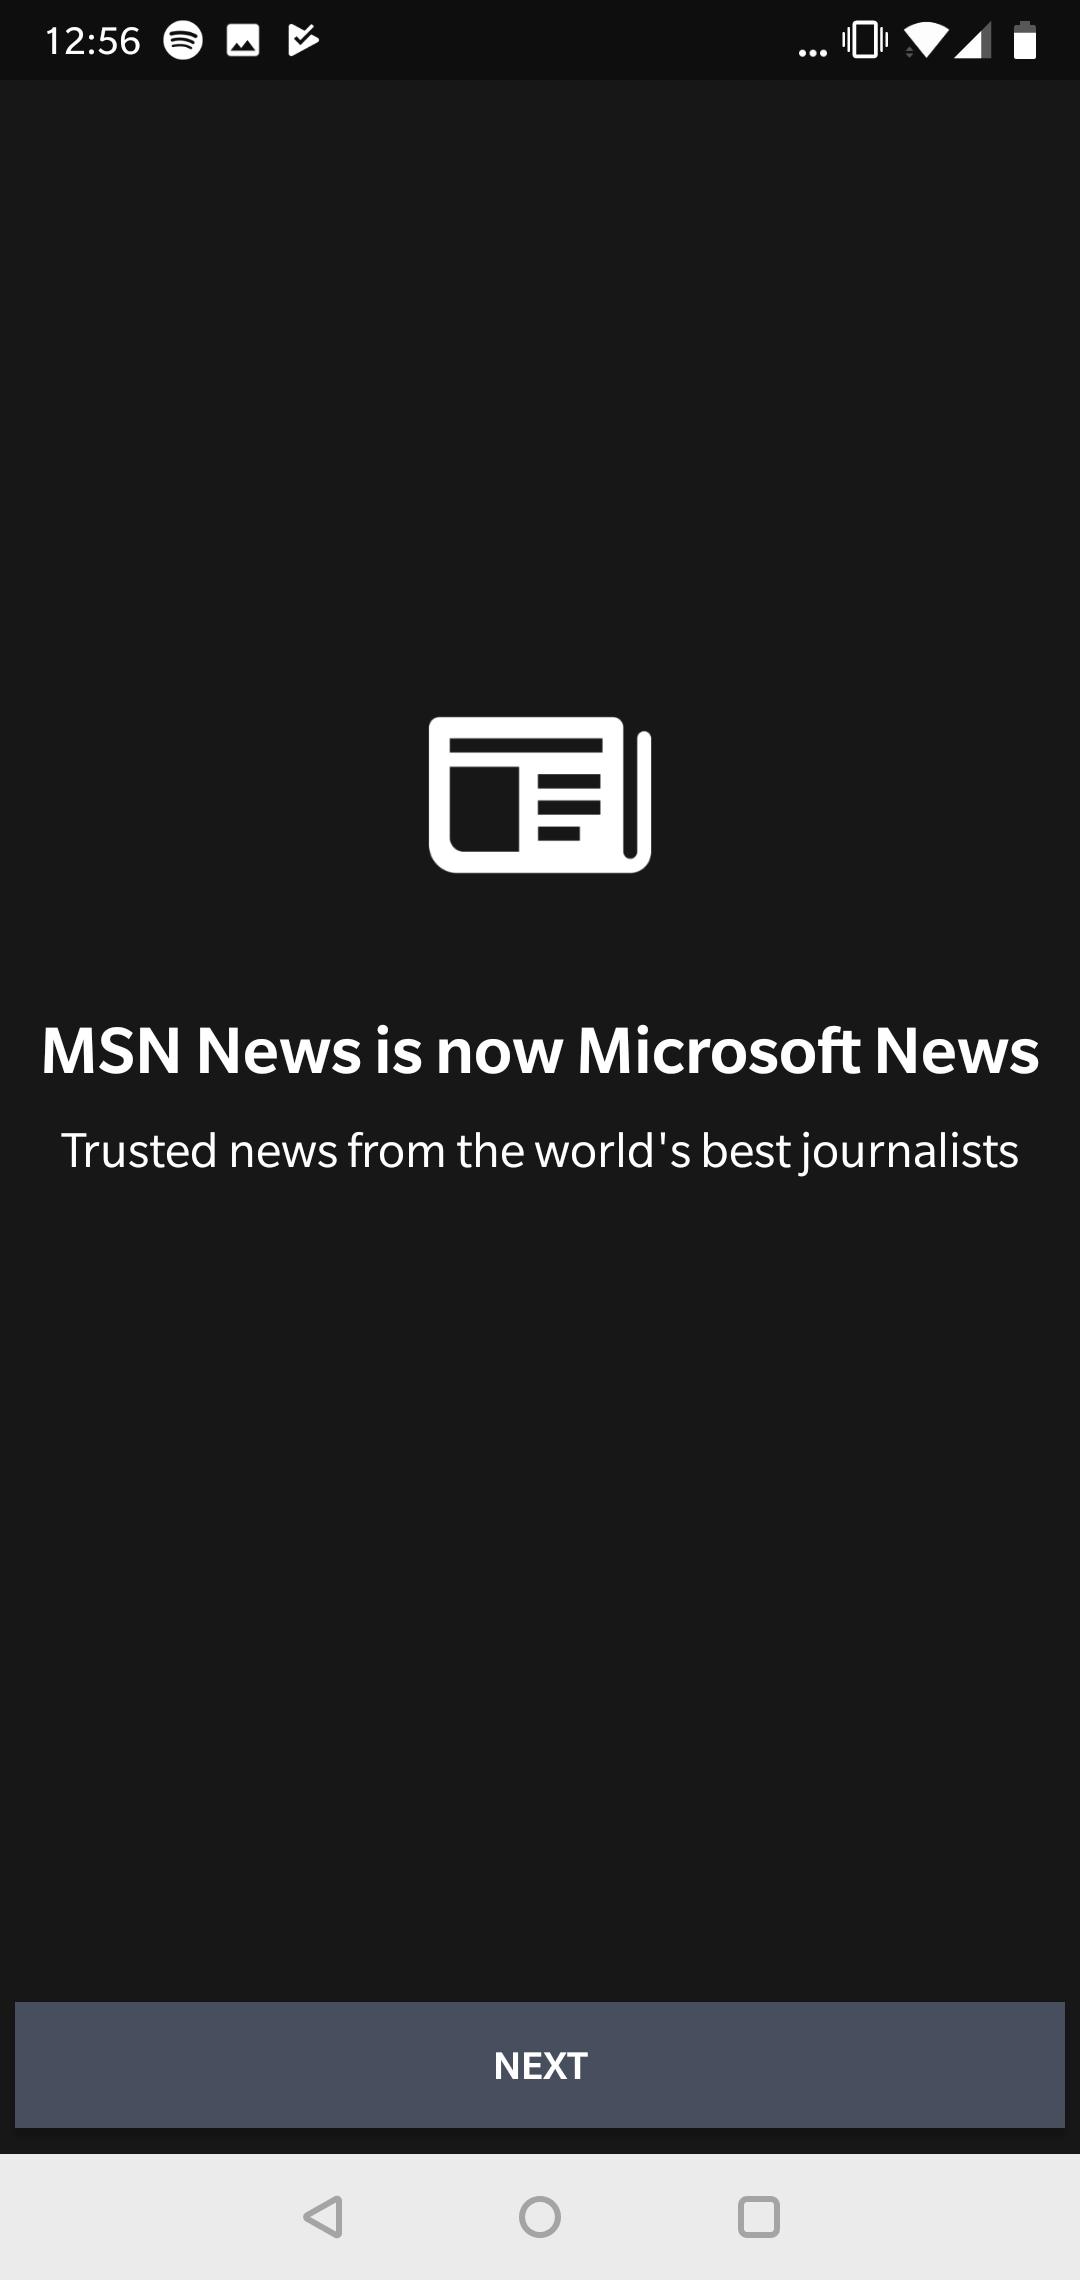 A screenshot showing the announcement that MSN News is now Microsoft News.